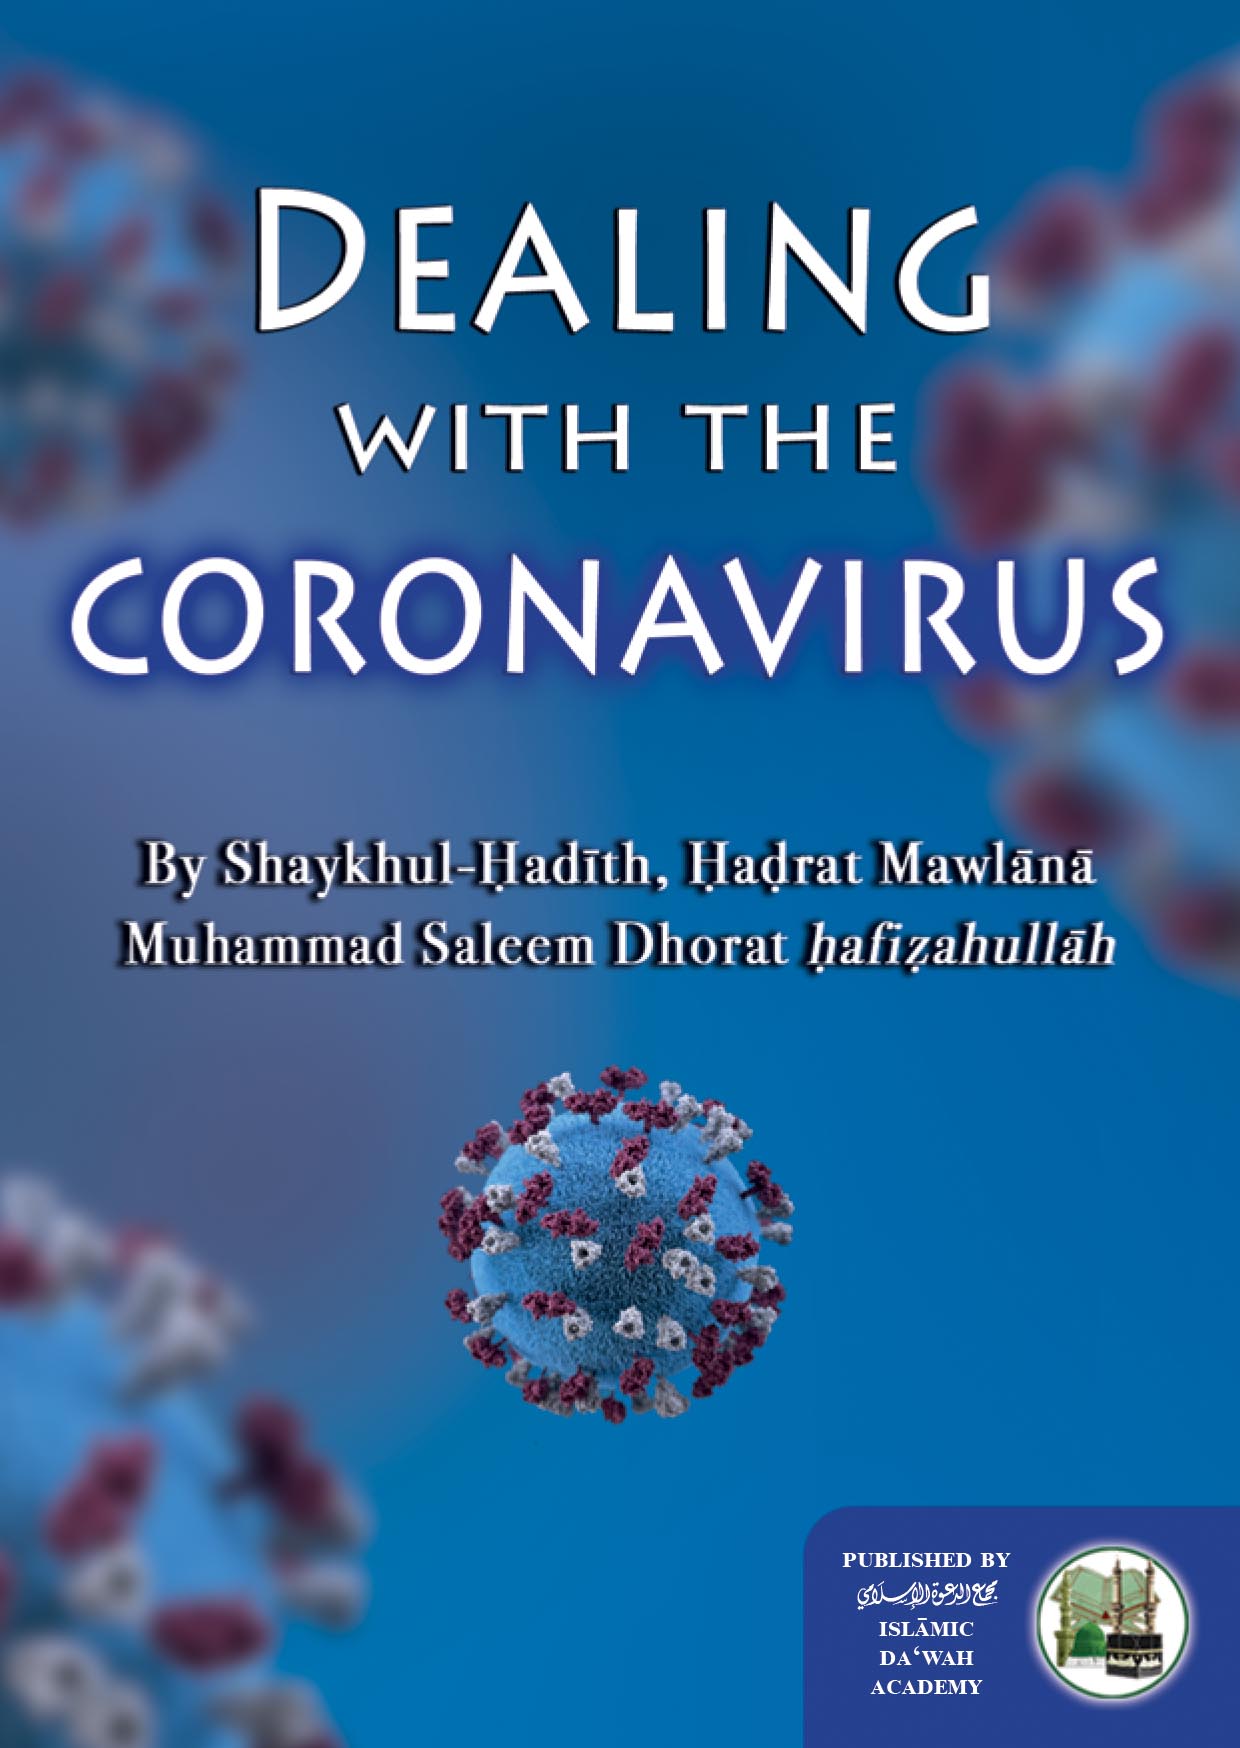 http://www.iabds.org/wp-content/uploads/2020/04/dealing-with-the-coronavirus_cover.jpg